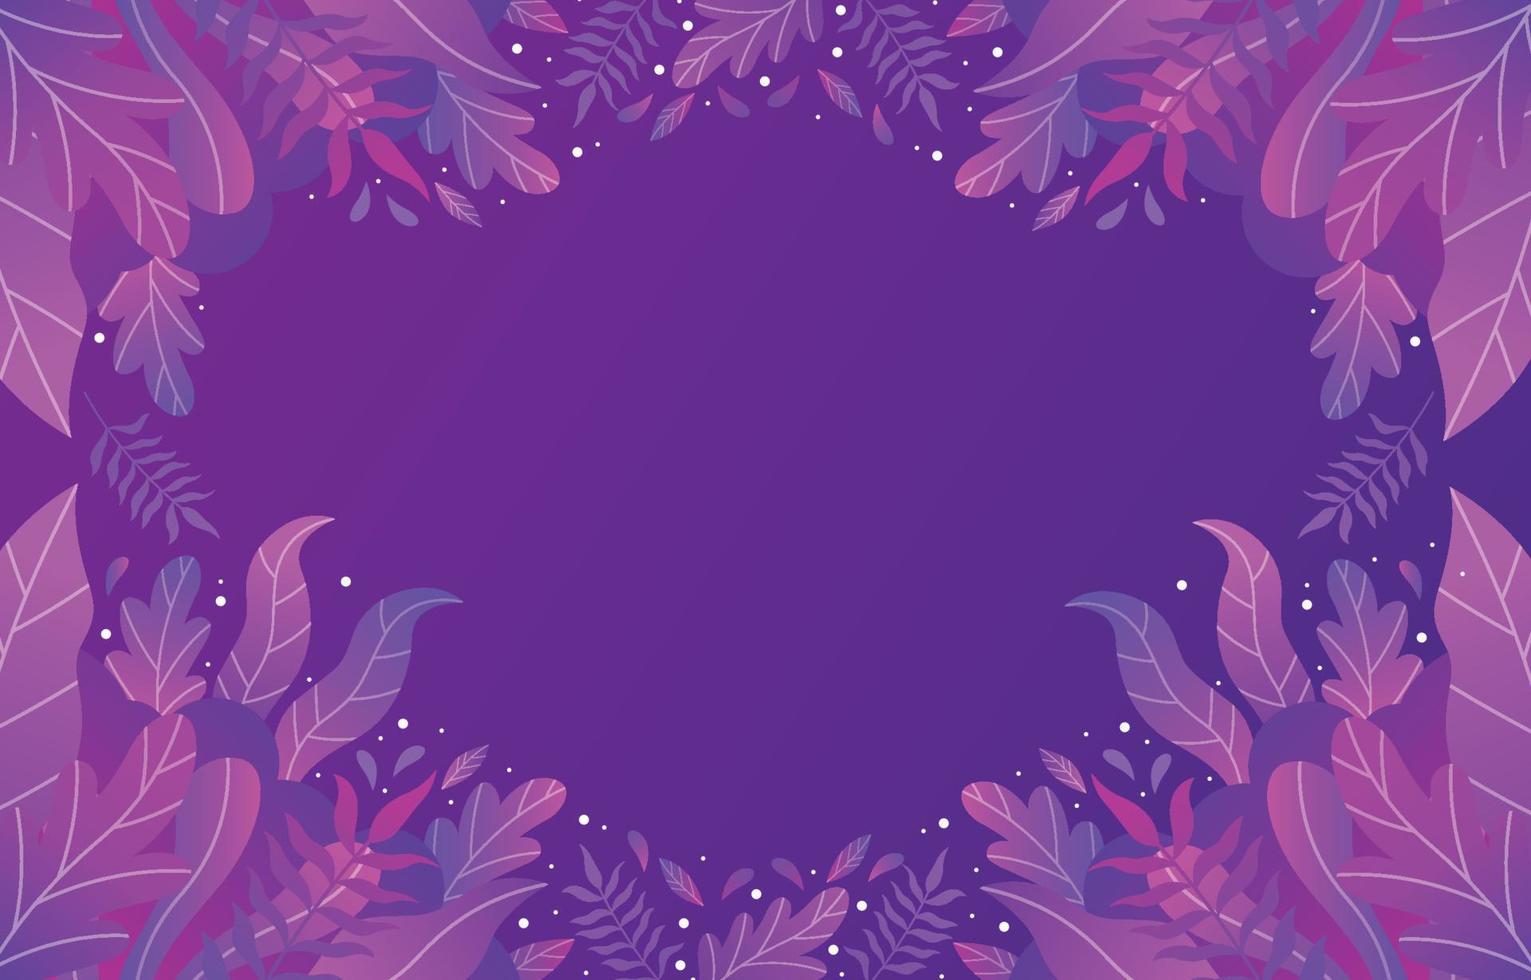 https://static.vecteezy.com/system/resources/previews/004/973/785/non_2x/purple-color-background-with-floral-gradient-element-free-vector.jpg